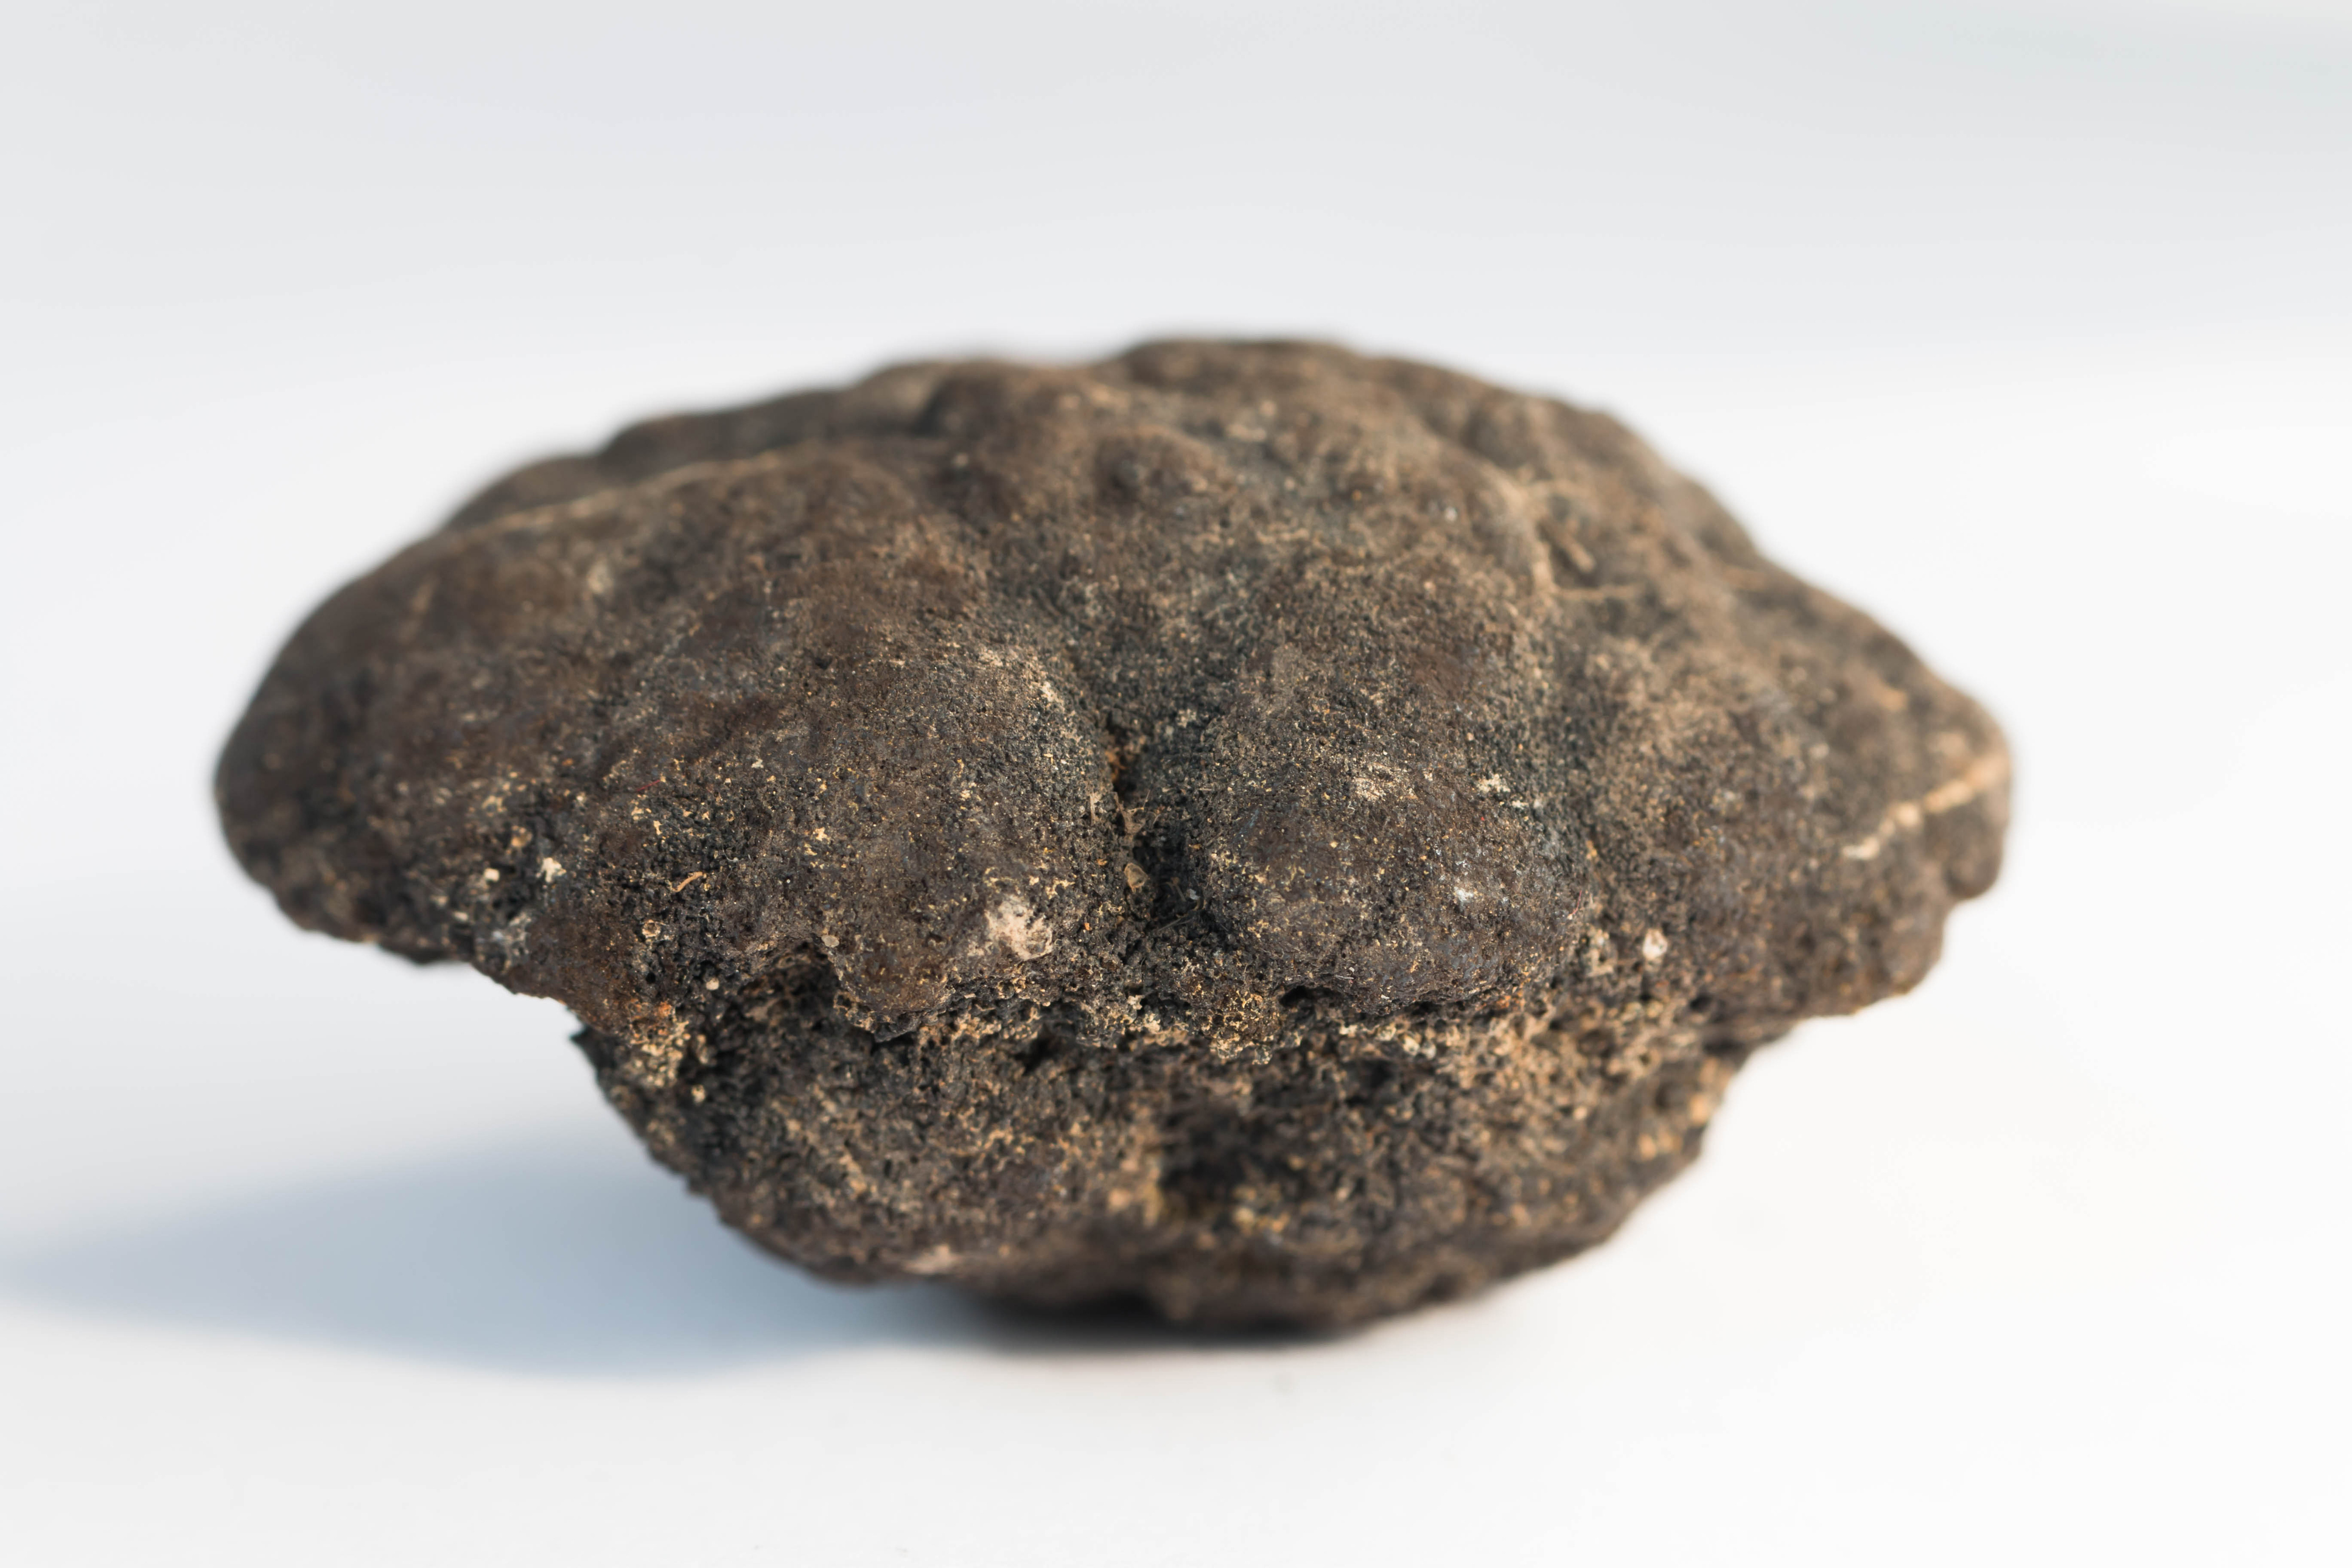 Polymetallic nodules from 5000m depth of Pacific ocean